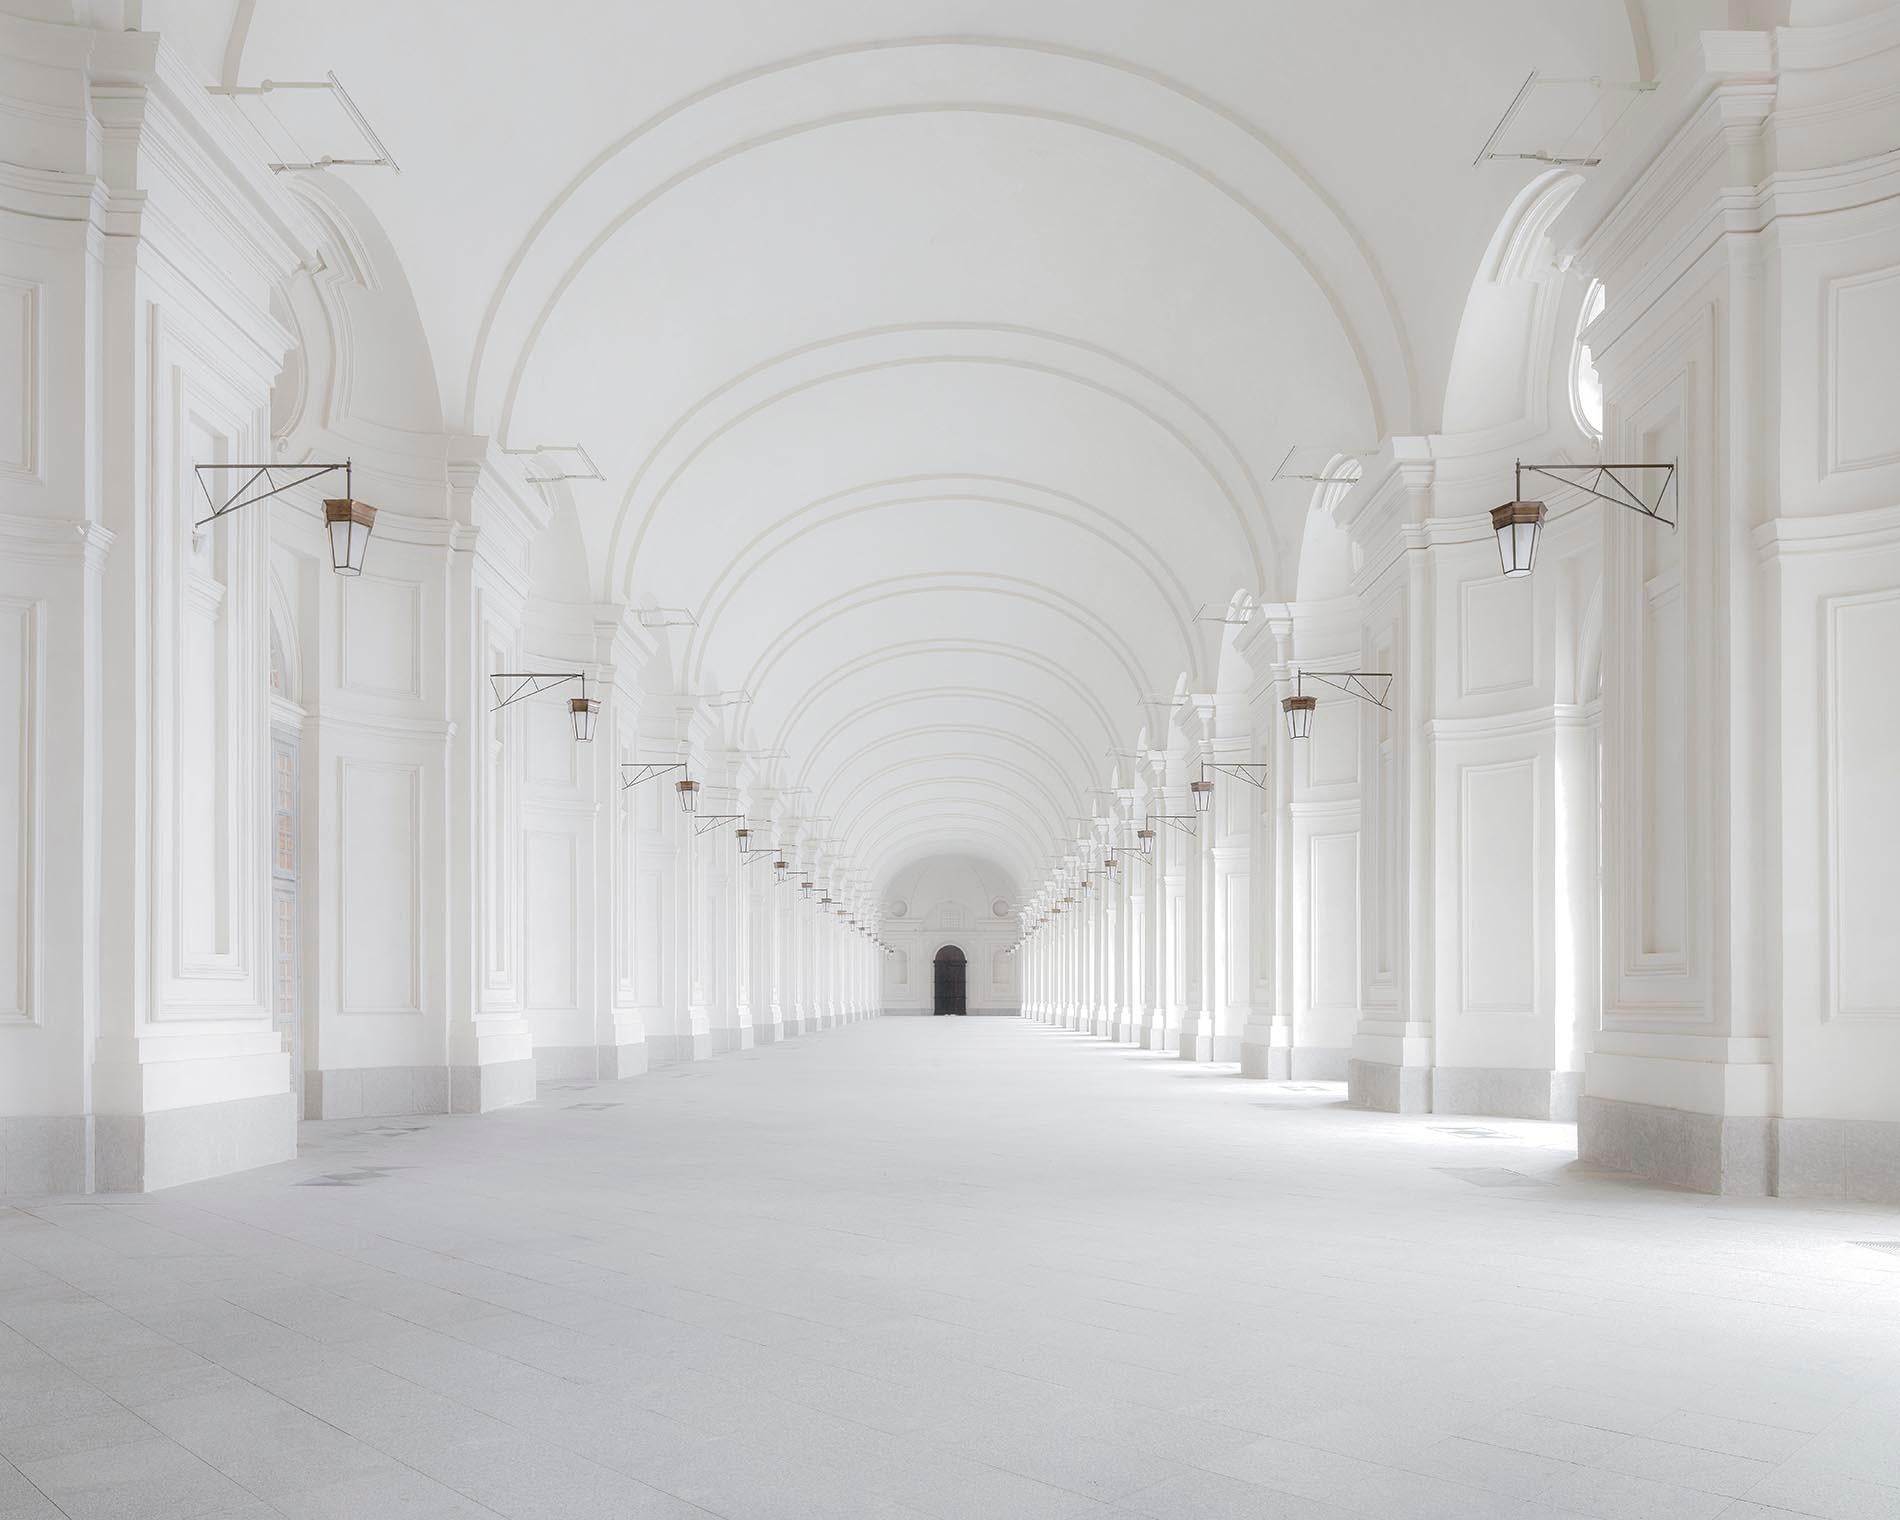 Venaria Reale XIV Torino, 2018
C-print 
Signed, titled, dated and numbered edition of 5 on artist's label on verso.  

The photographer is based in Florence, and is fascinated how his architectural subject matter allows him to control the